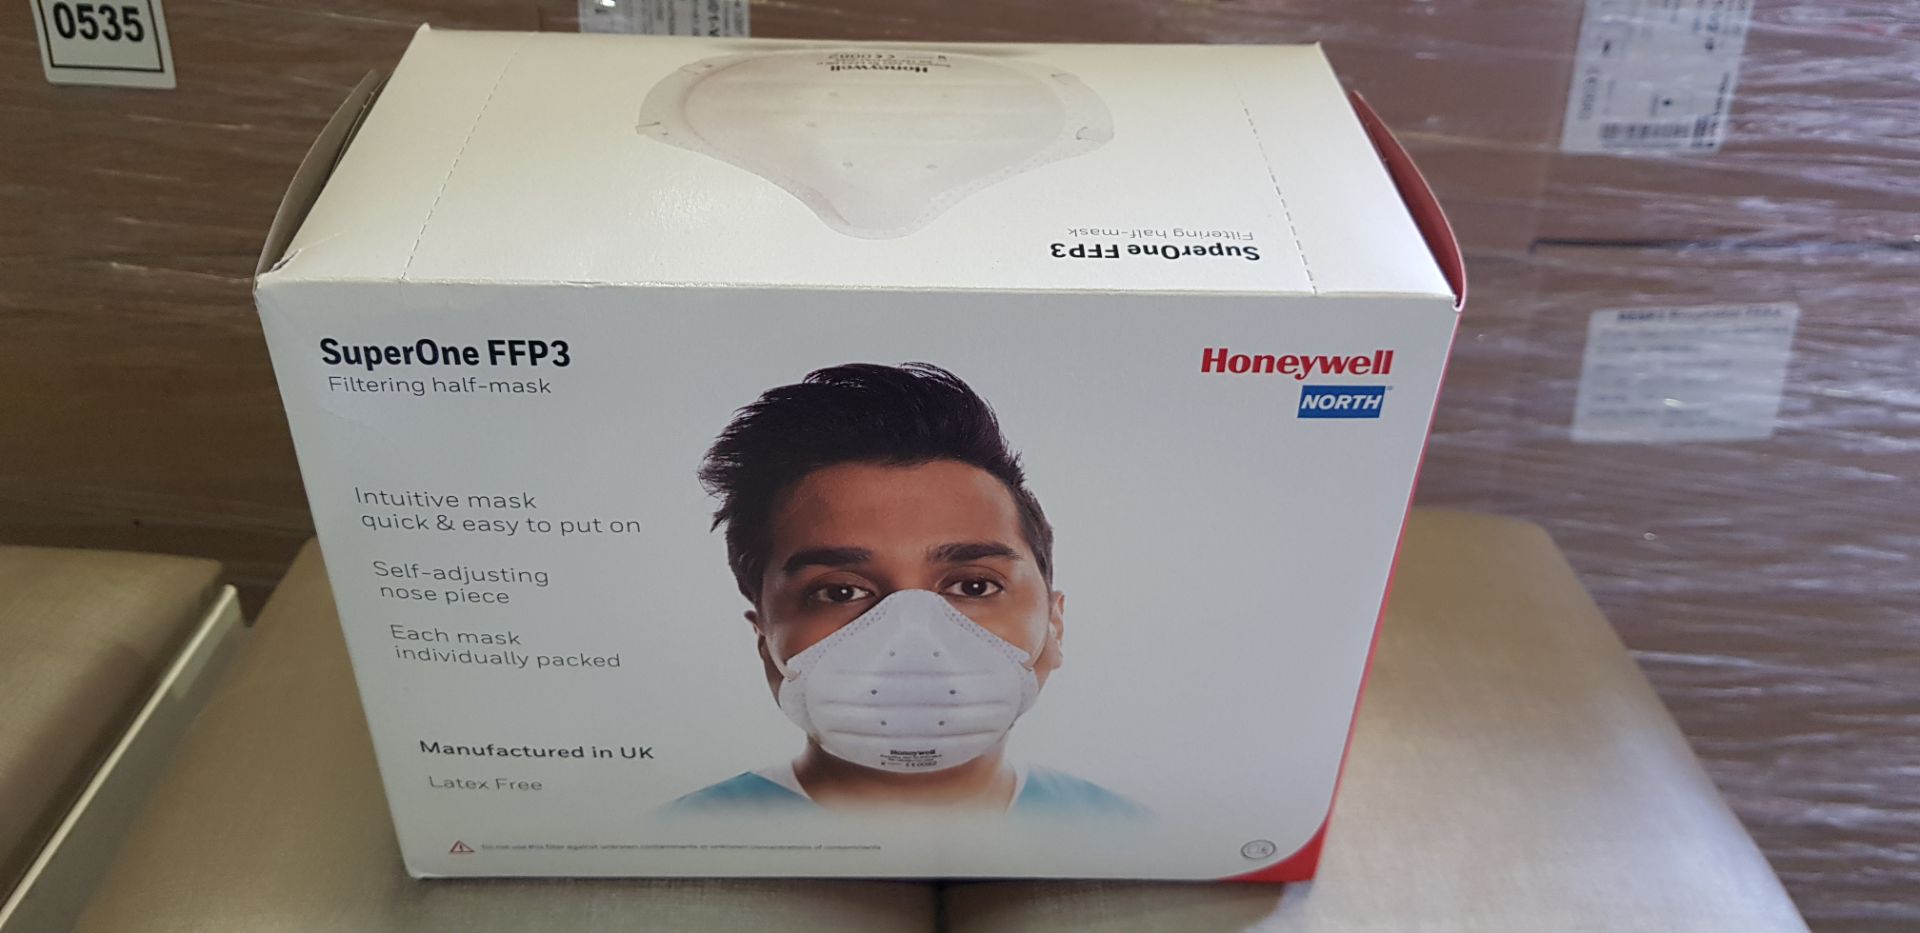 960 X BRAND NEW HONEYWELL NORTH SUPER ONE FFP3 FILTERING HALF MASK ( EACH MASK INDIVIDUALLY PACKED )